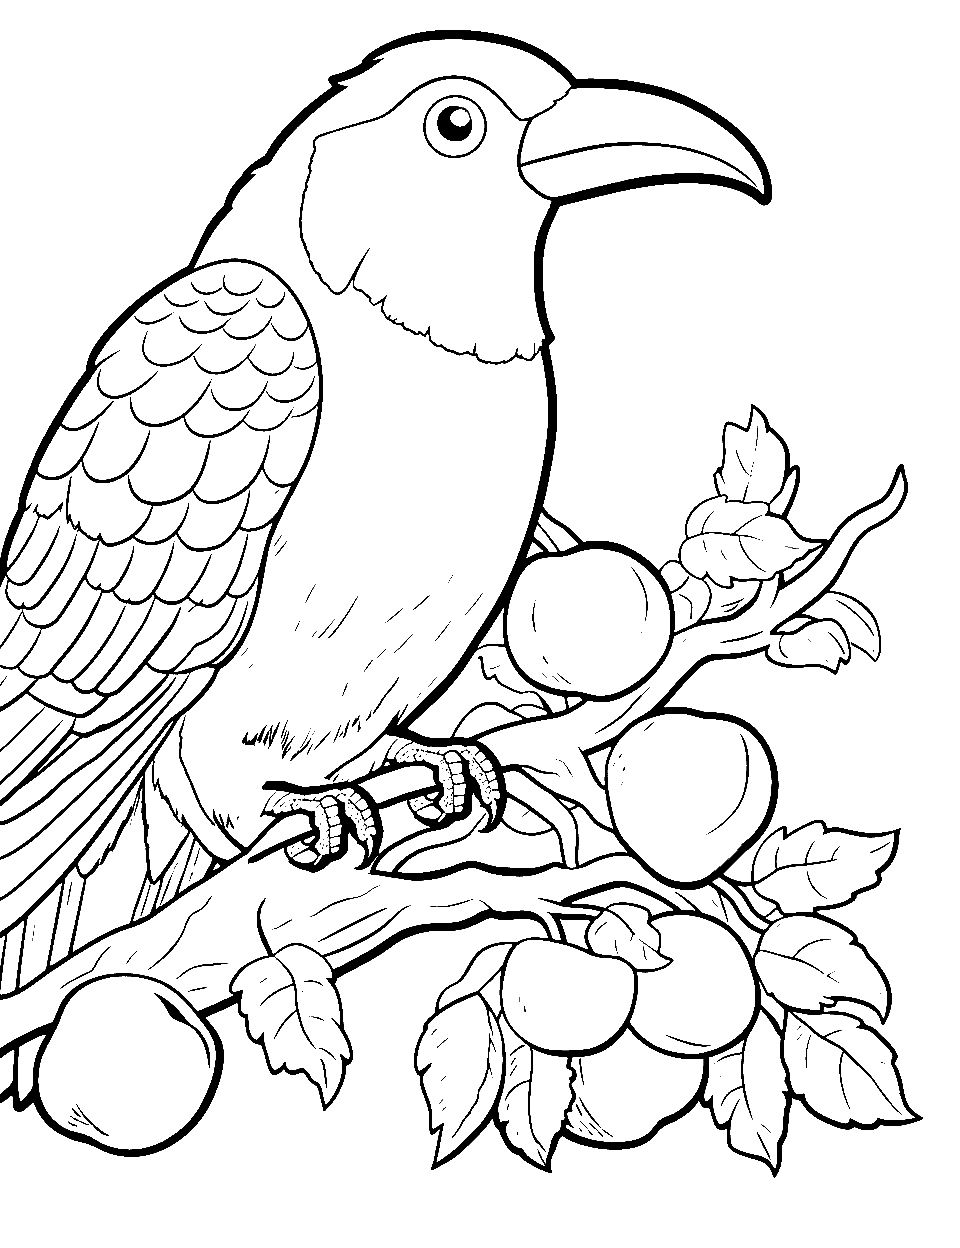 Toucan's Fruit Feast Coloring Page - A toucan on a branch of juicy fruits ready to be eaten.